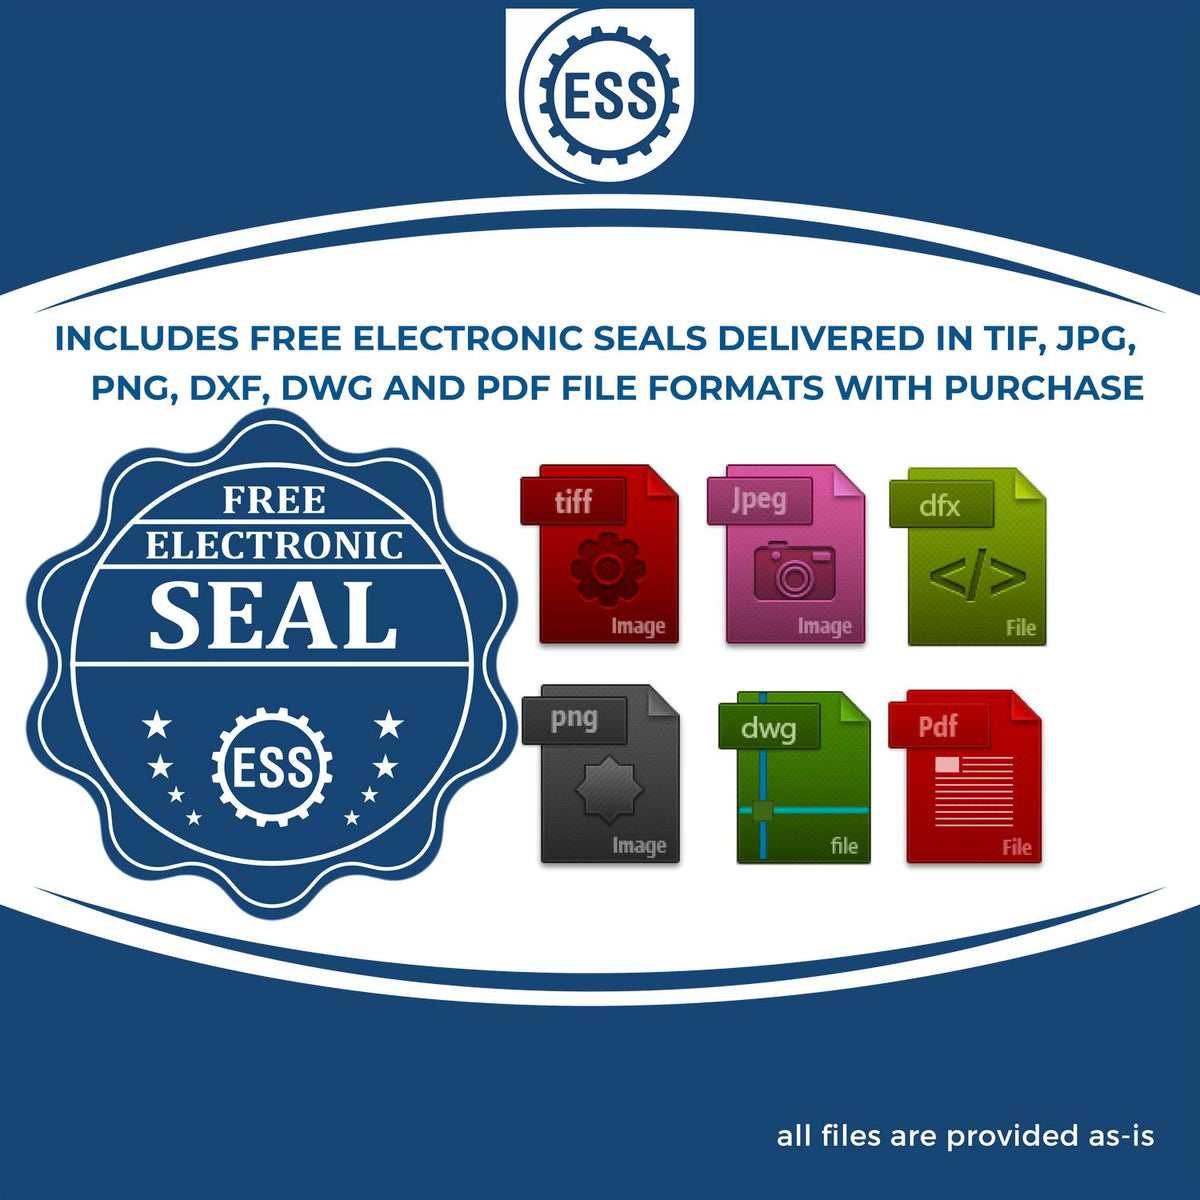 An infographic for the free electronic seal for the Heavy-Duty New Hampshire Rectangular Notary Stamp illustrating the different file type icons such as DXF, DWG, TIF, JPG and PNG.